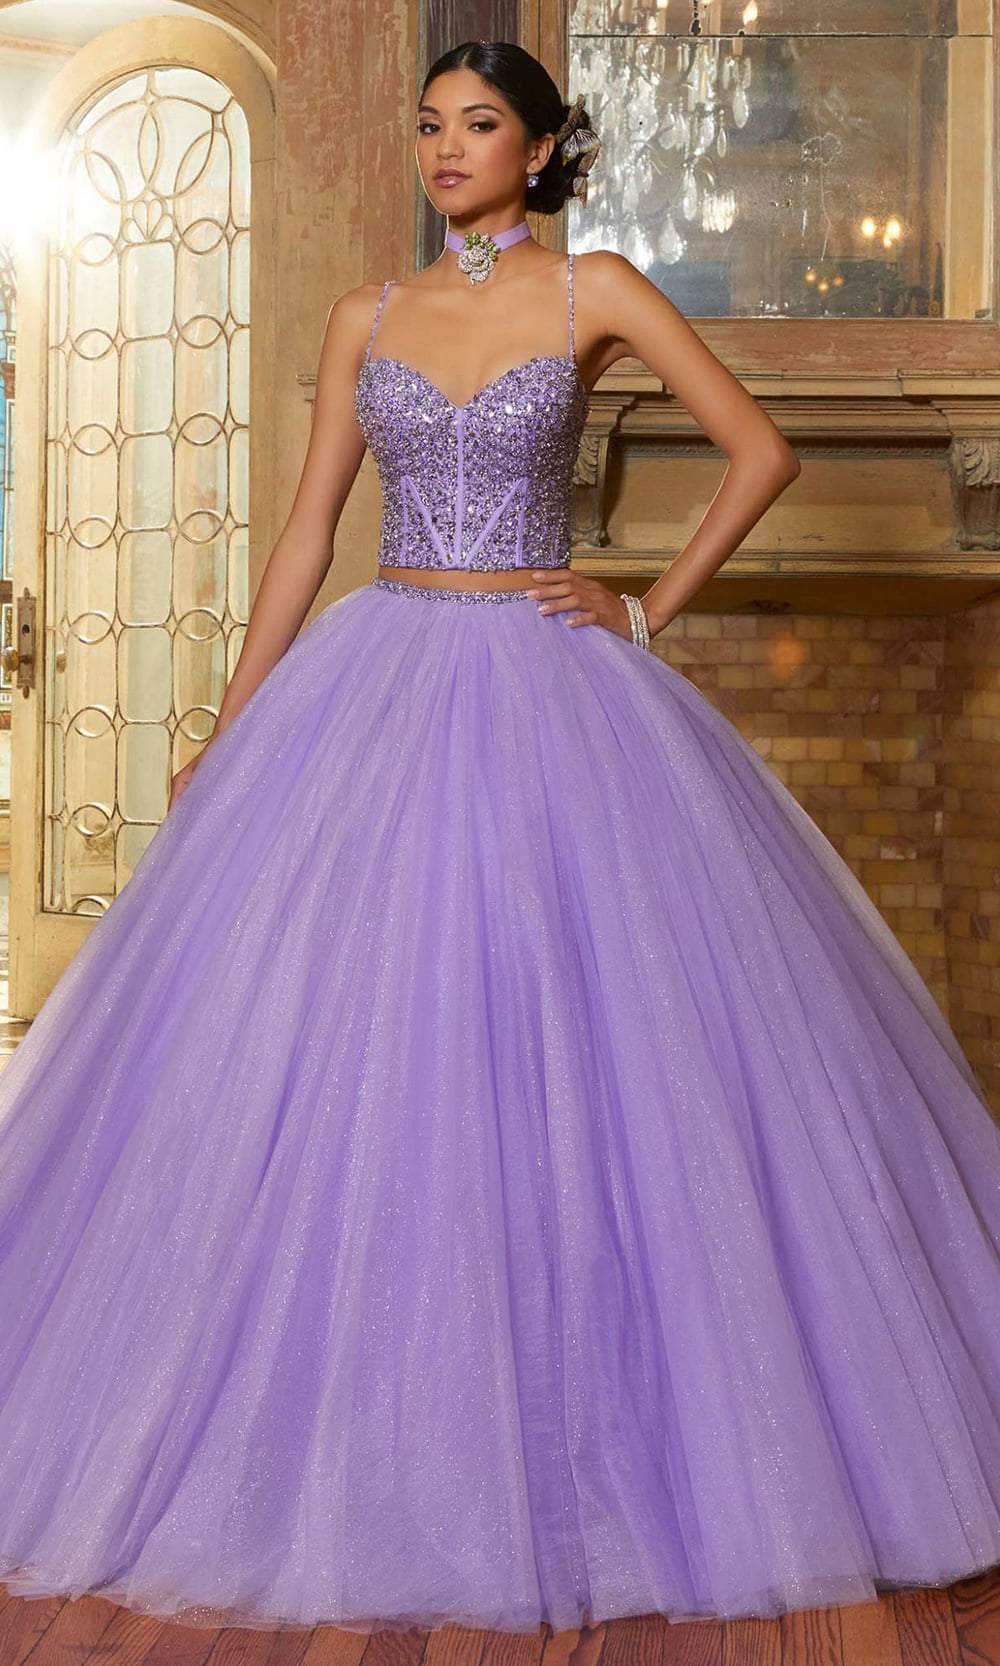 Image of Mori Lee 60154 - Two Piece Embellished Ballgown